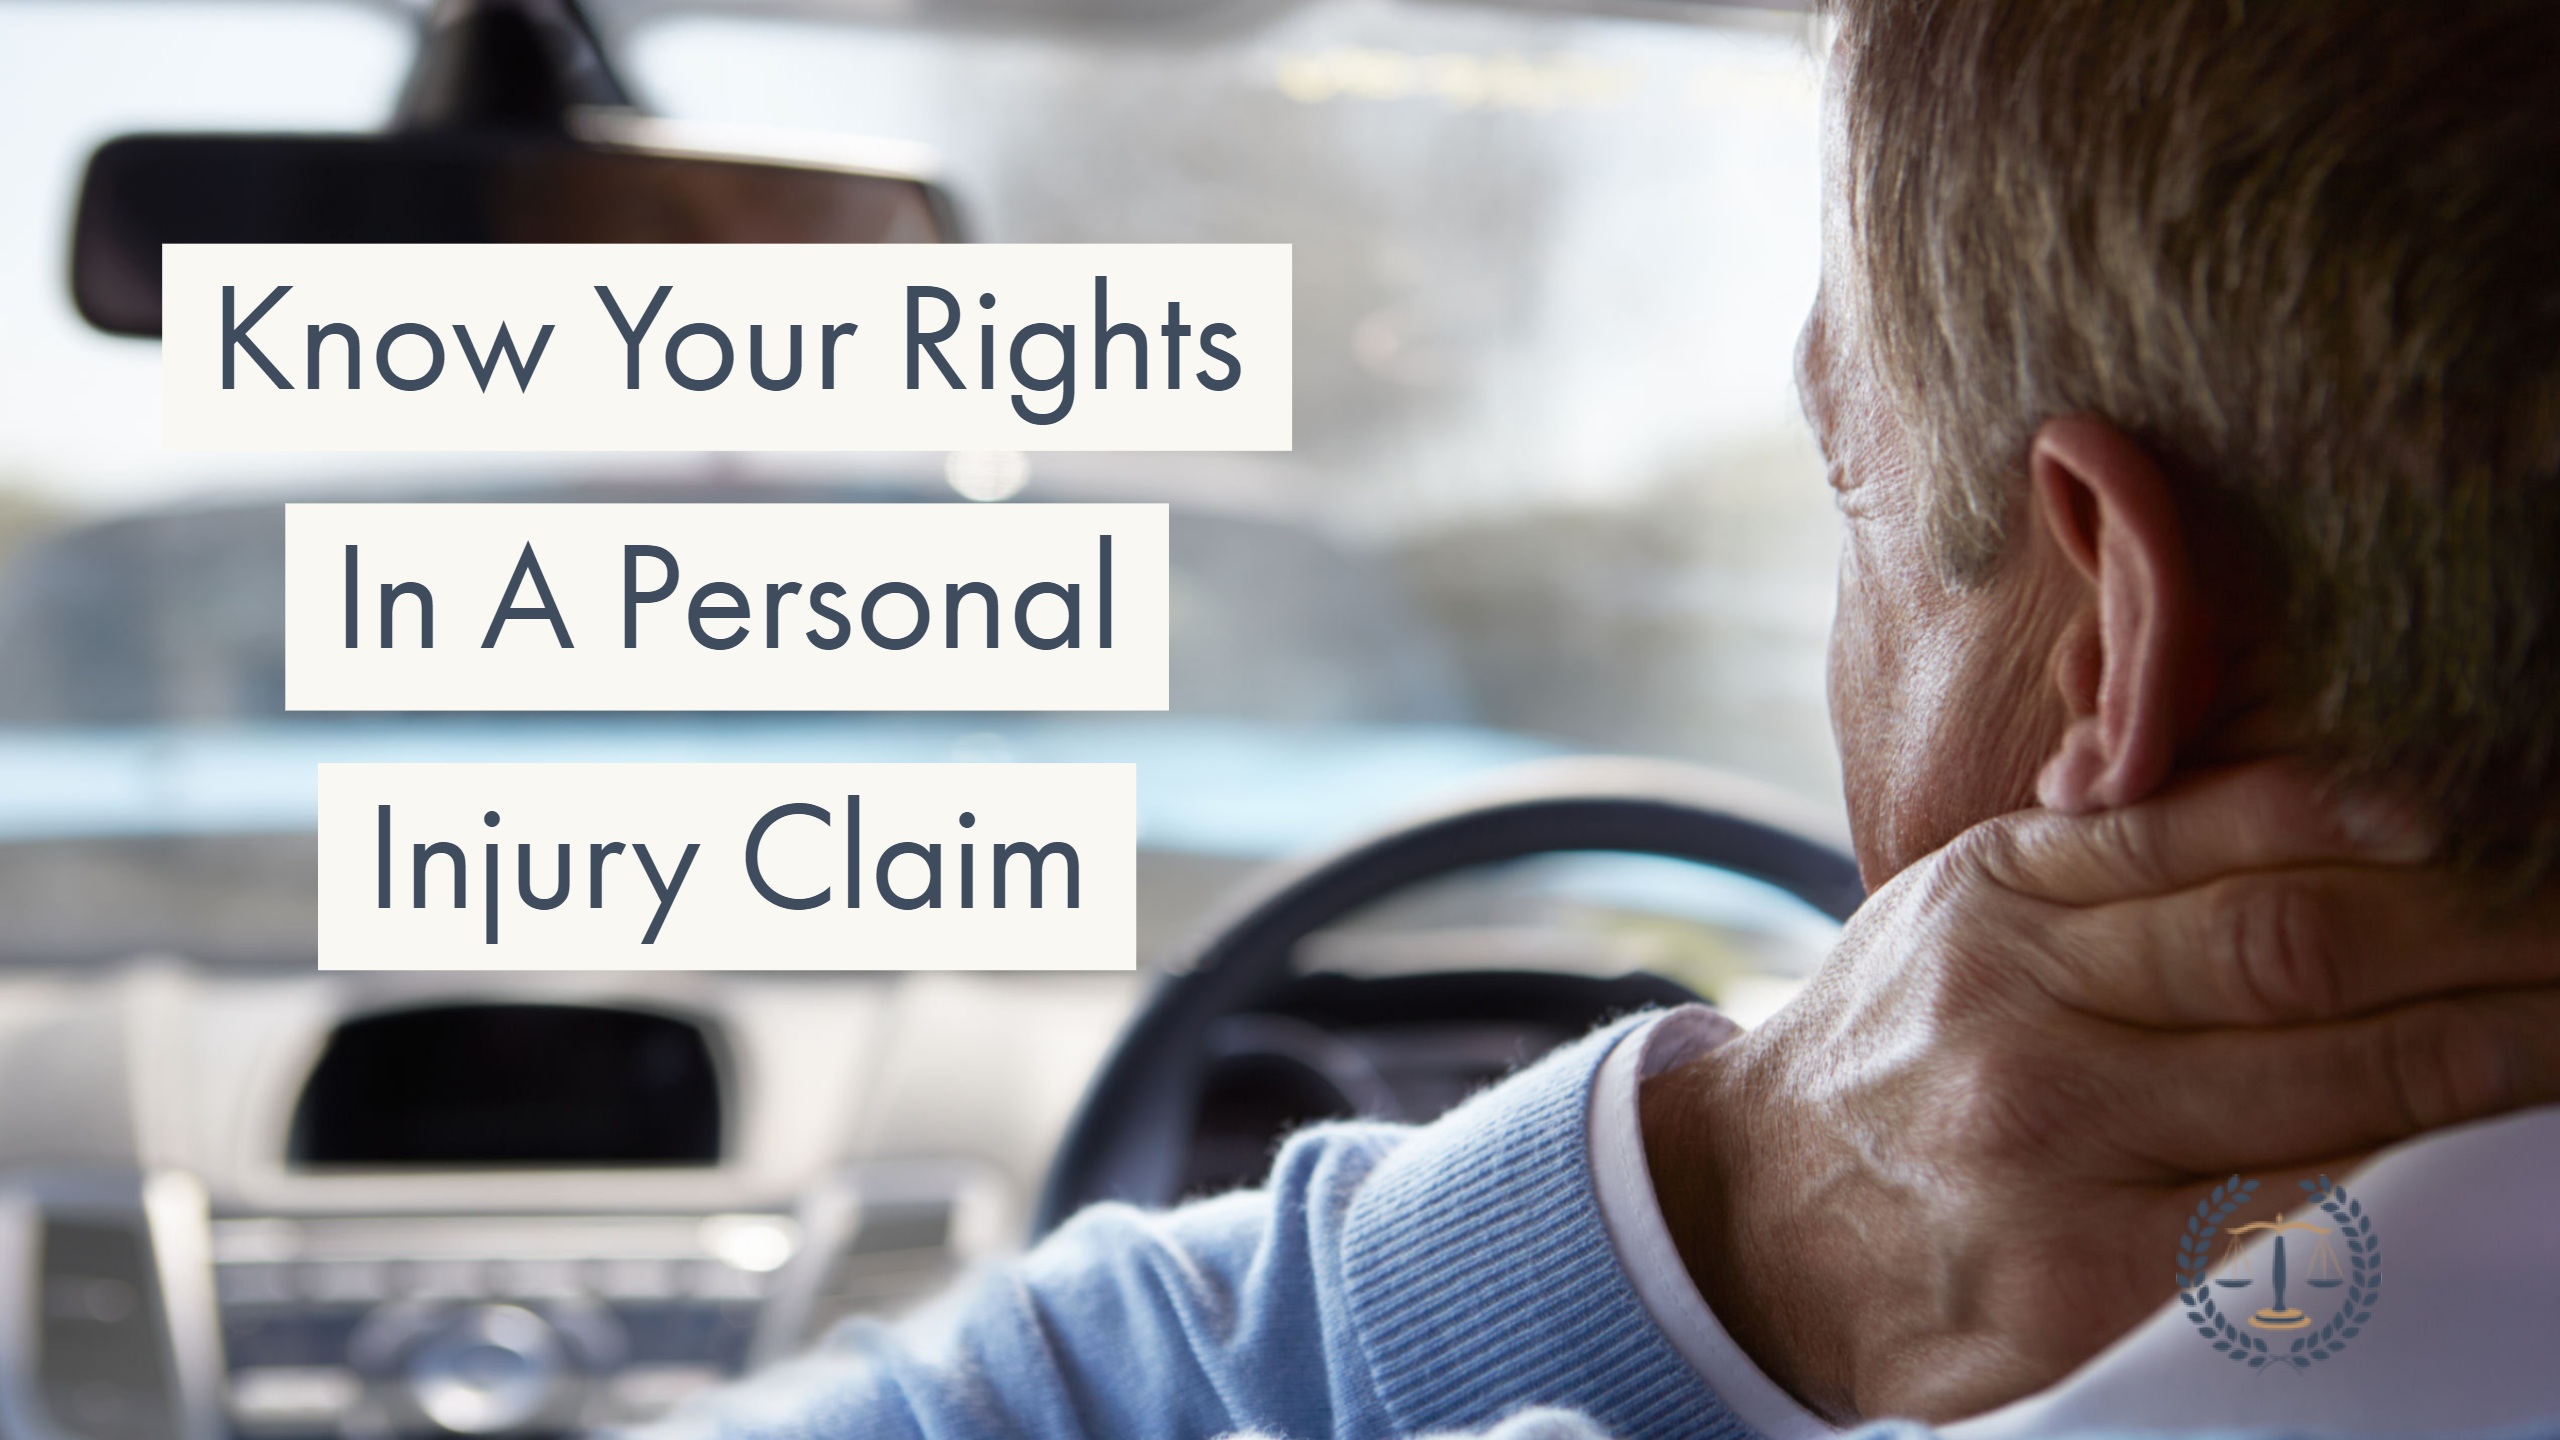 Know Your Rights In A Personal Injury Claim